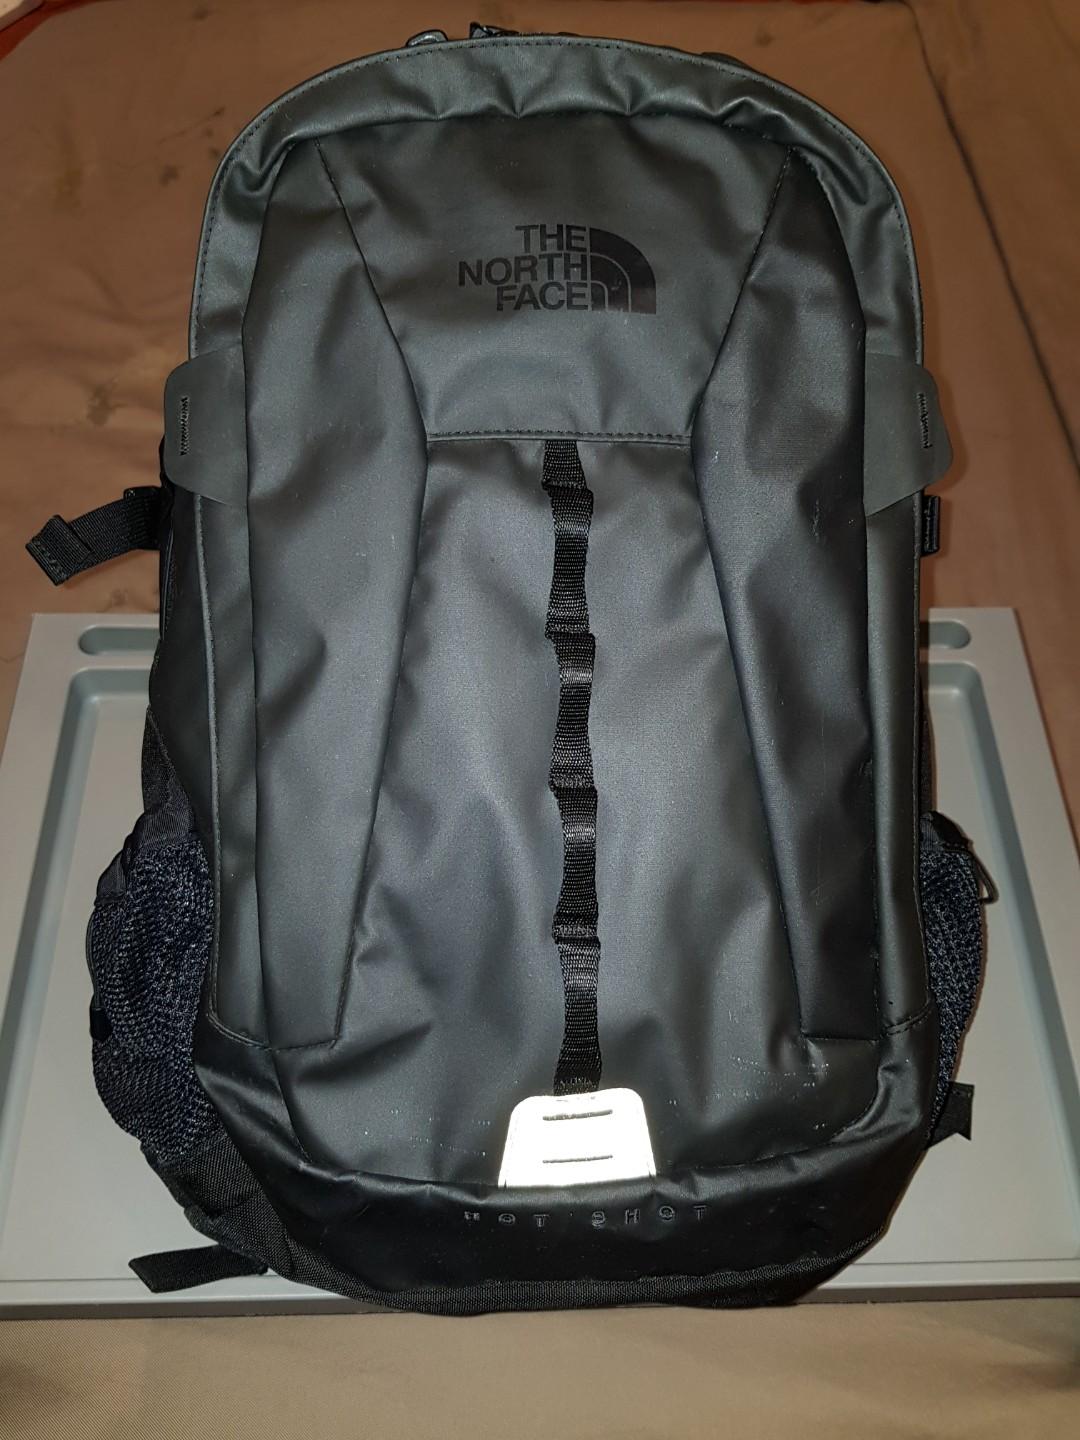 The North Face Hot Shot Backpack Men S Fashion Bags Wallets Backpacks On Carousell